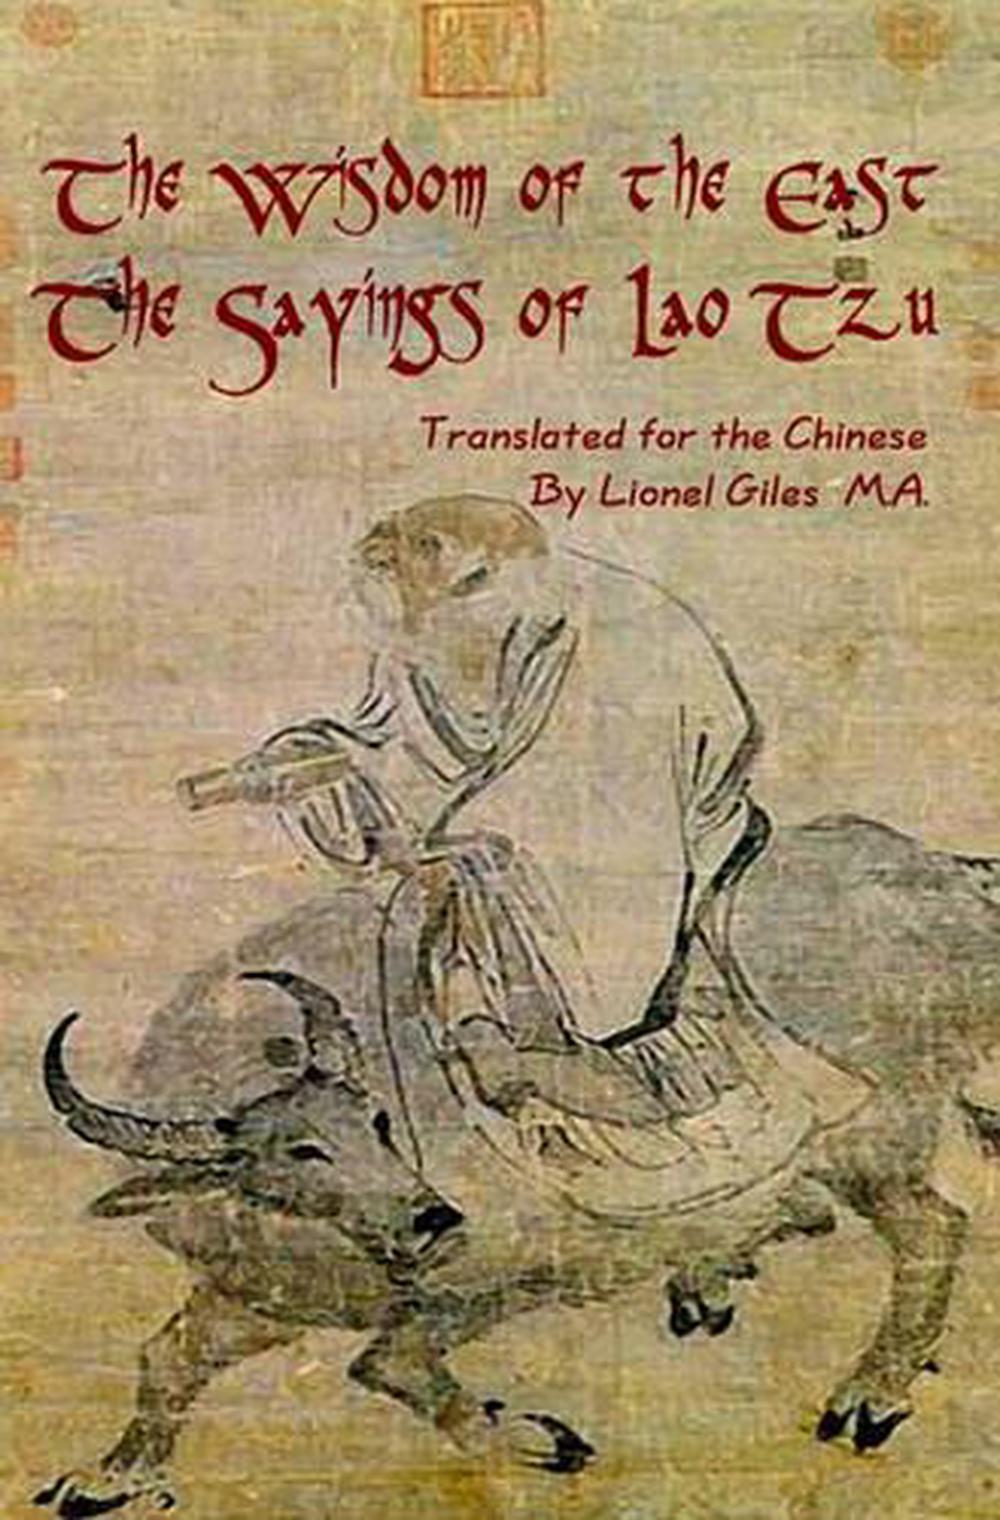 Wisdom of the East, the Sayings of Lao Tzu by Lionel Giles M.a